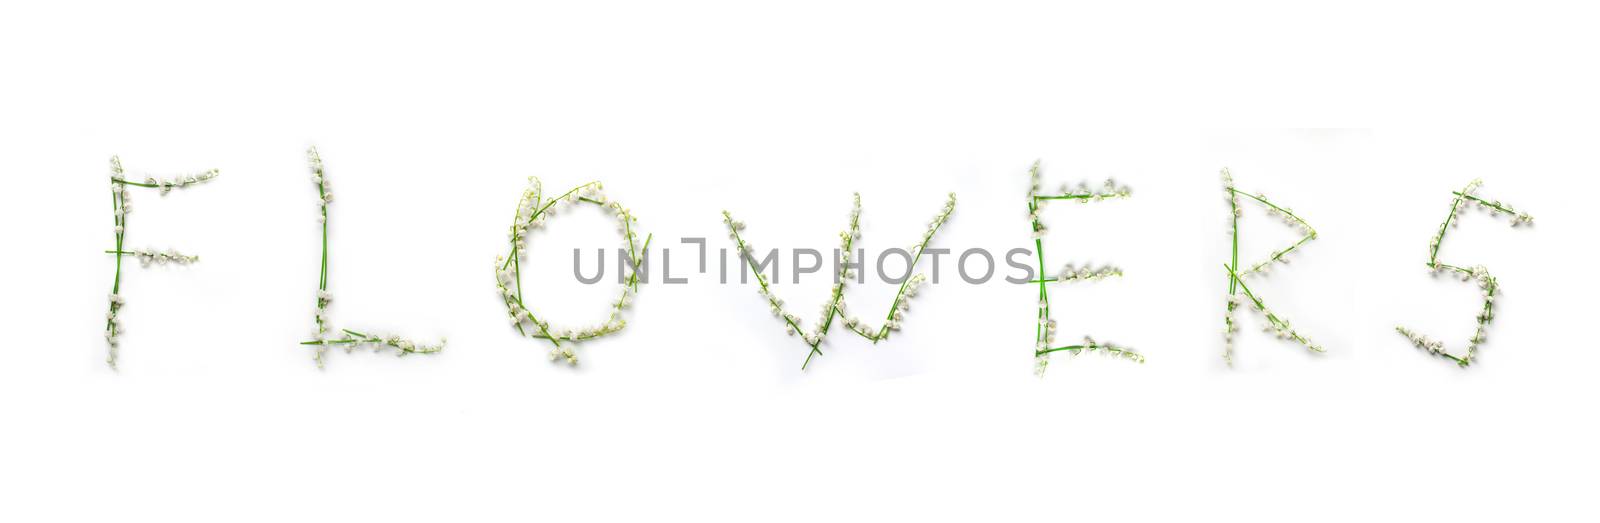 word of lily of the valley flowers isolated on white background.